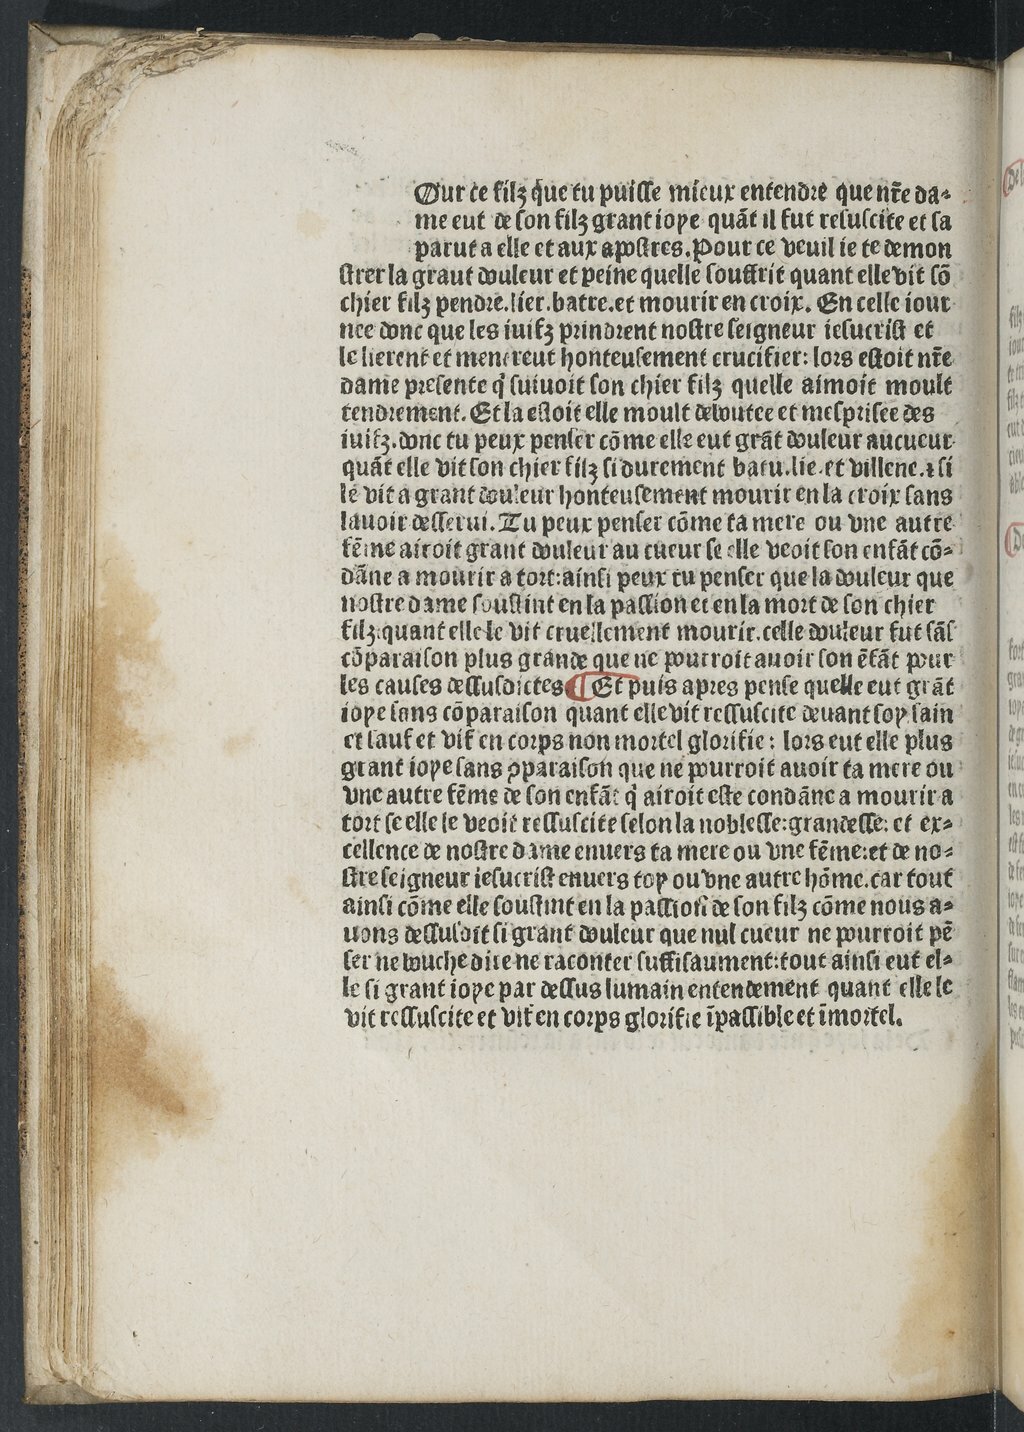 1482 [Antoine Caillaut] Trésor des humains BnF_Page_066.jpg